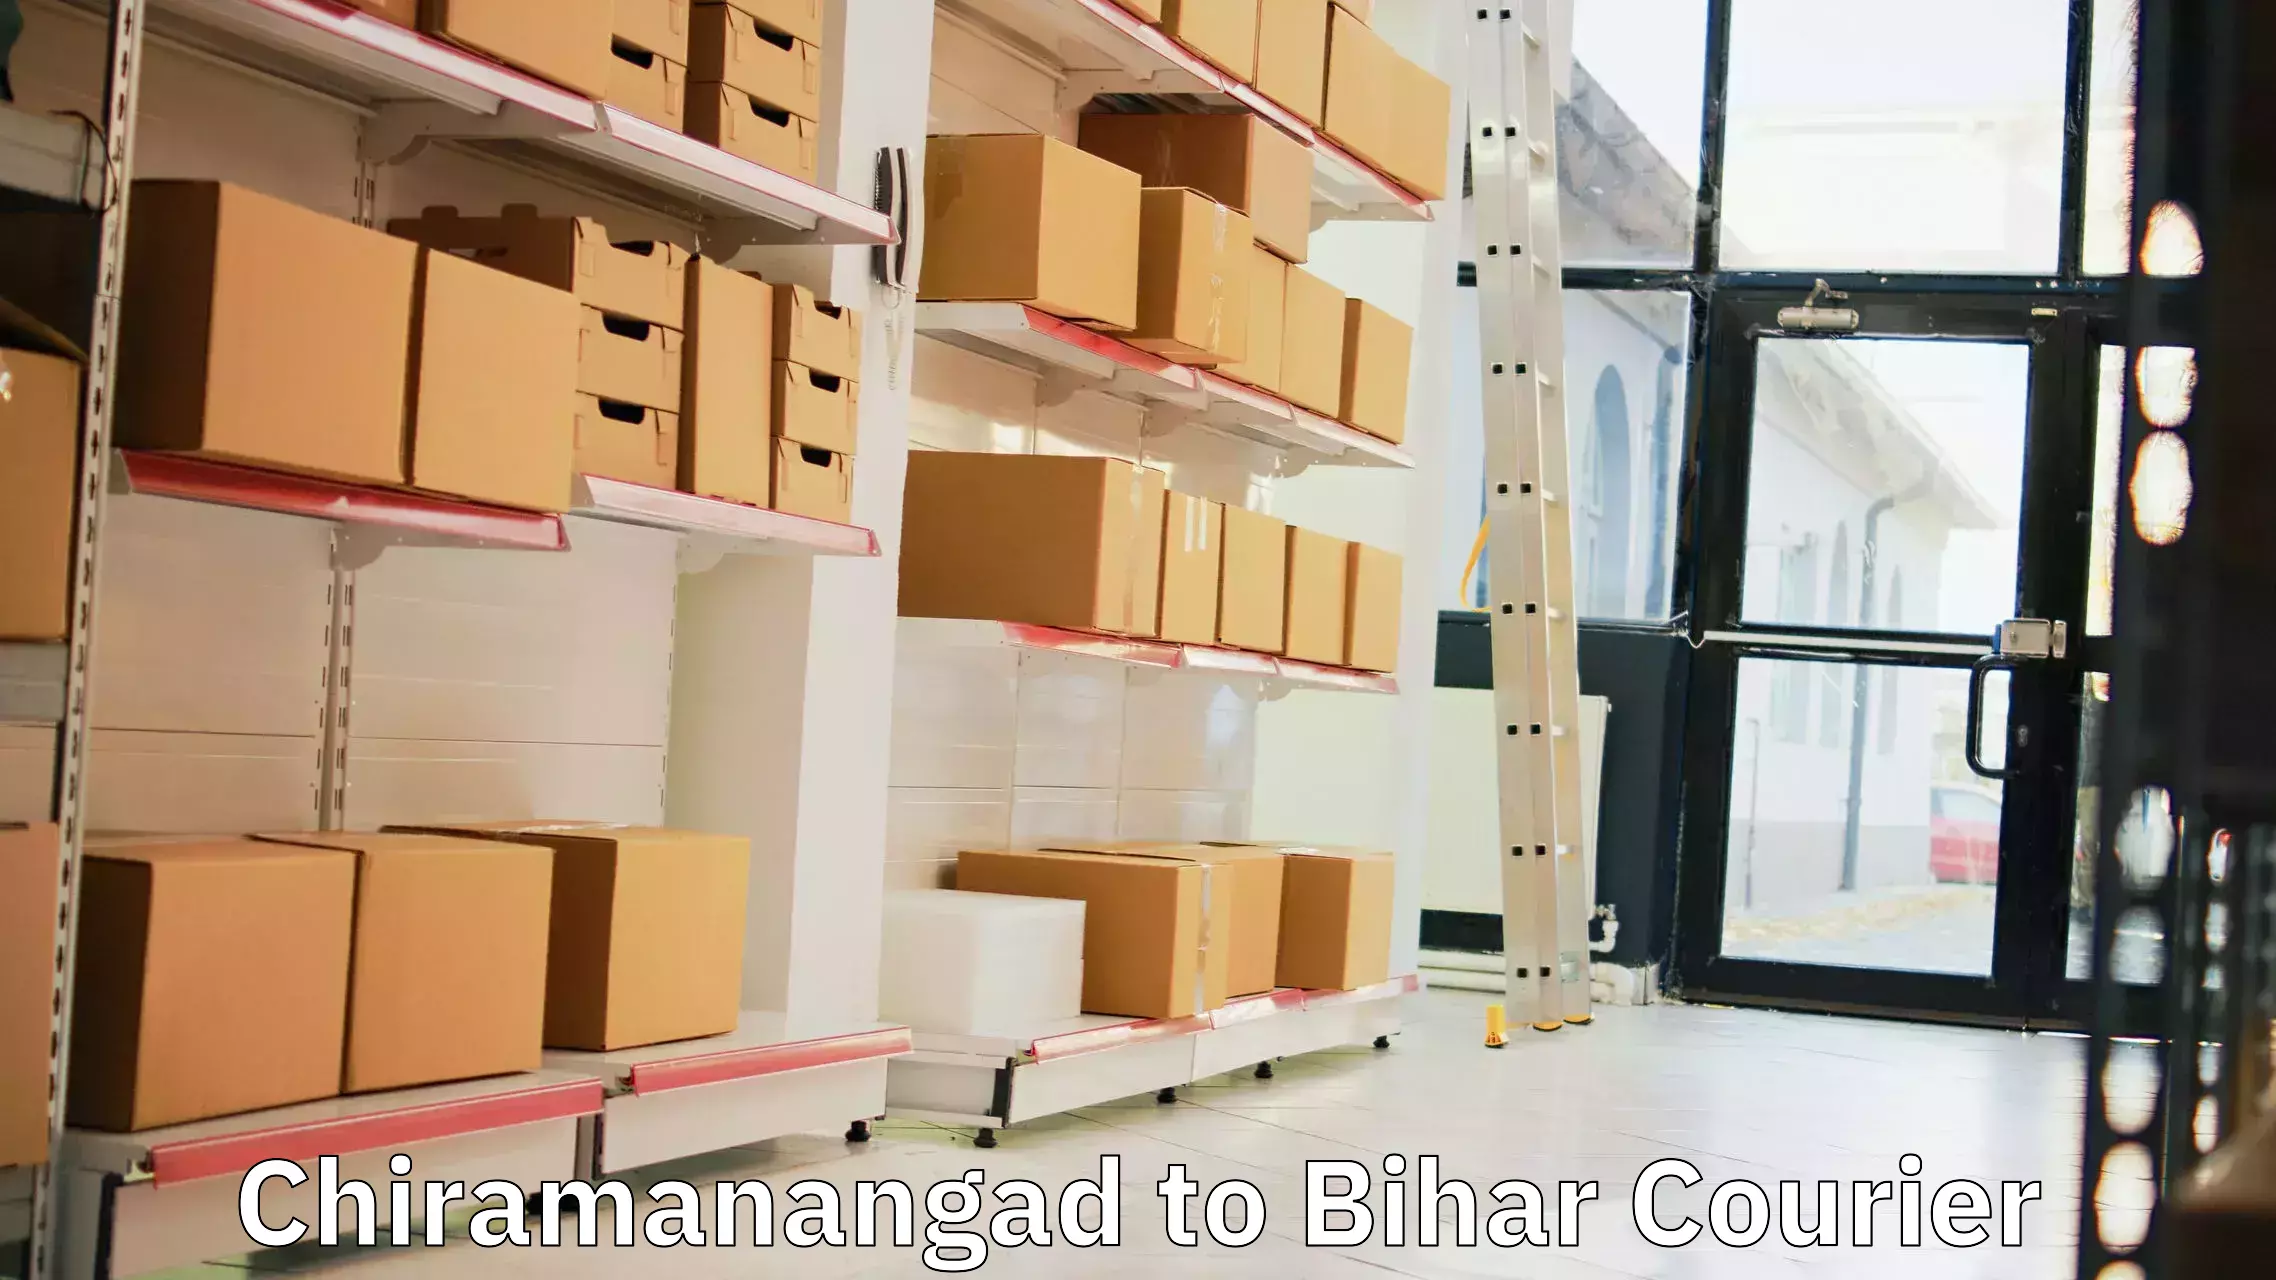 Customized delivery options Chiramanangad to Rajpur